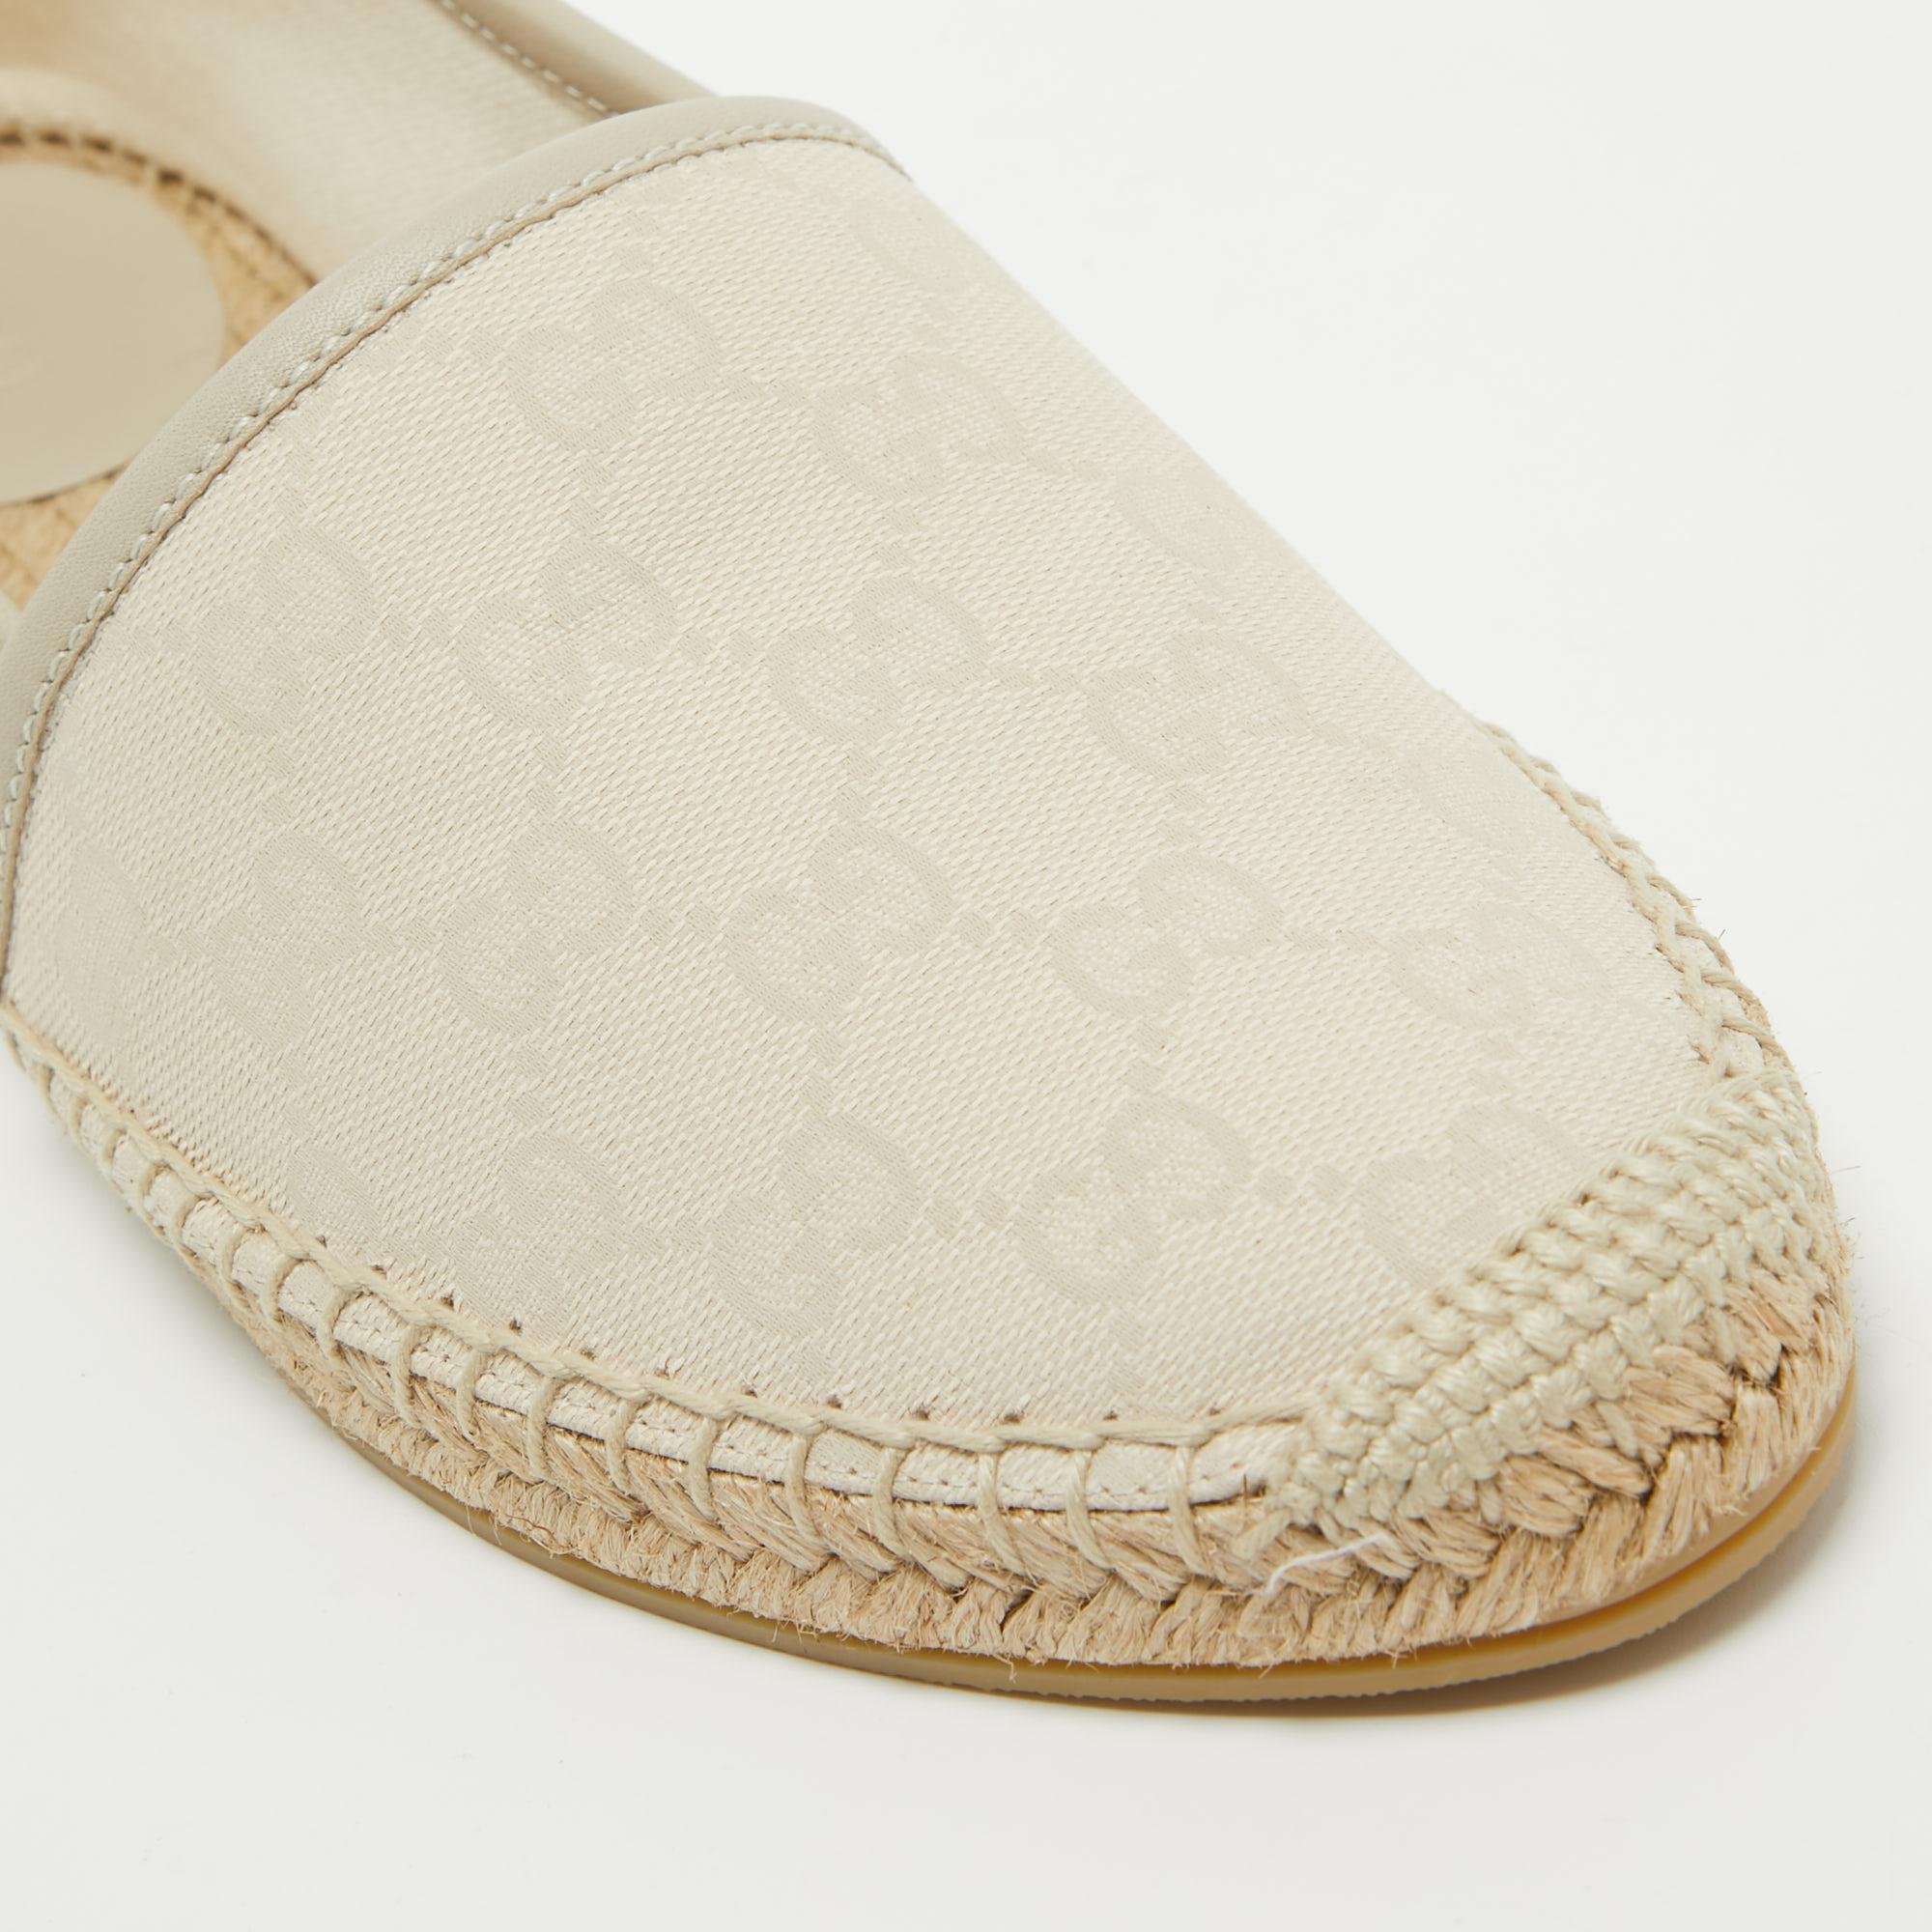 These well-crafted Gucci espadrille flats have got you covered for all-day plans. They come in a versatile design, and they look great on the feet.

Includes: Original Dustbag, Original Box